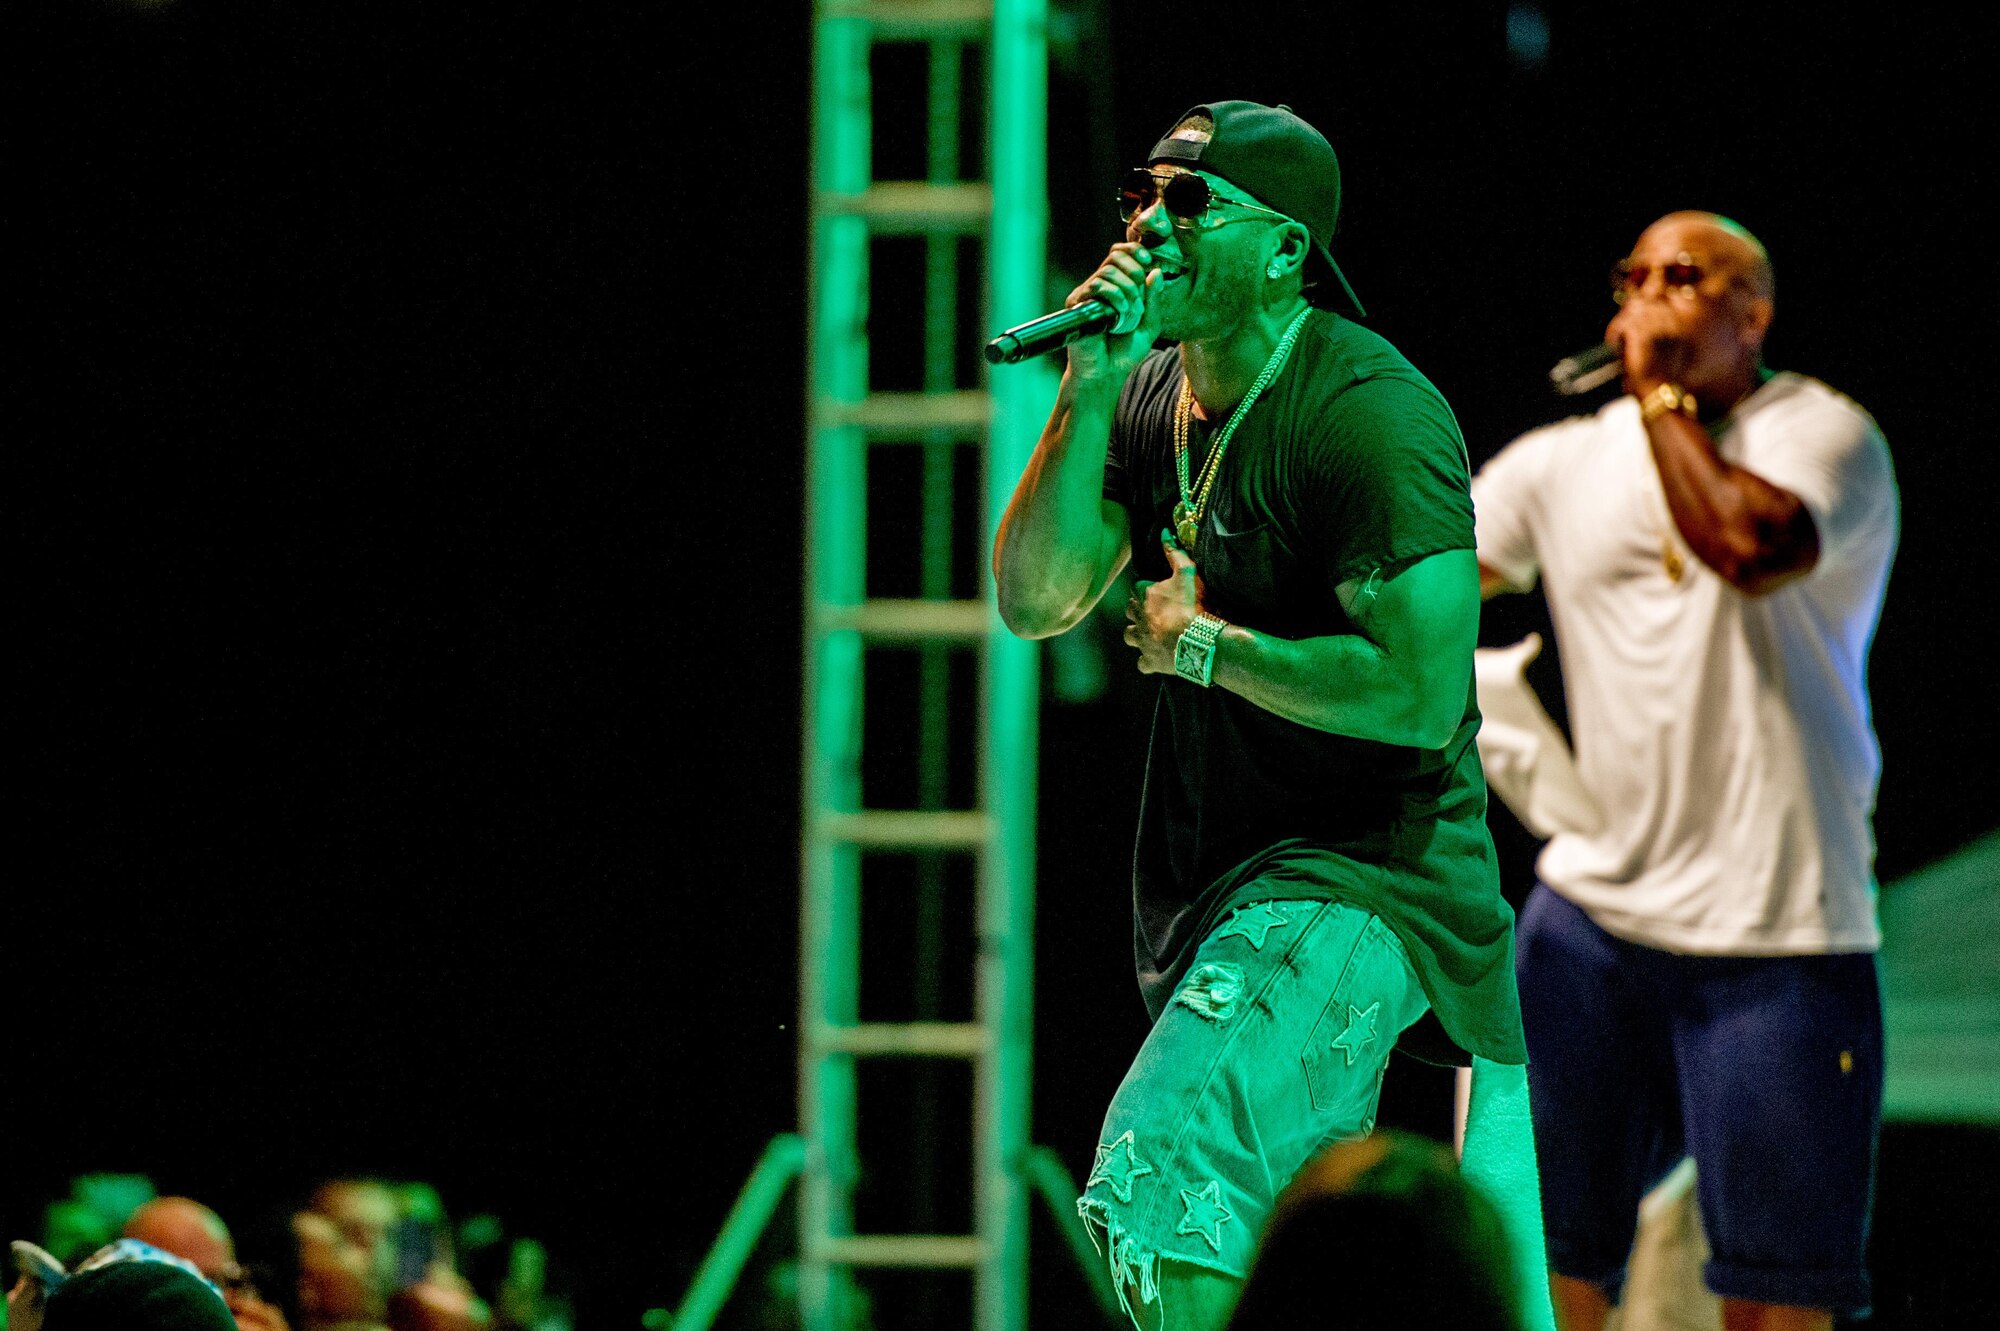 Nelly performs a song at Osan Air Base, Republic of Korea, Sept. 3, 2016. Nelly put on a one-night concert for members of Team Osan and their families. (U.S. Air Force photo by Staff Sgt. Jonathan Steffen)                                                                                           